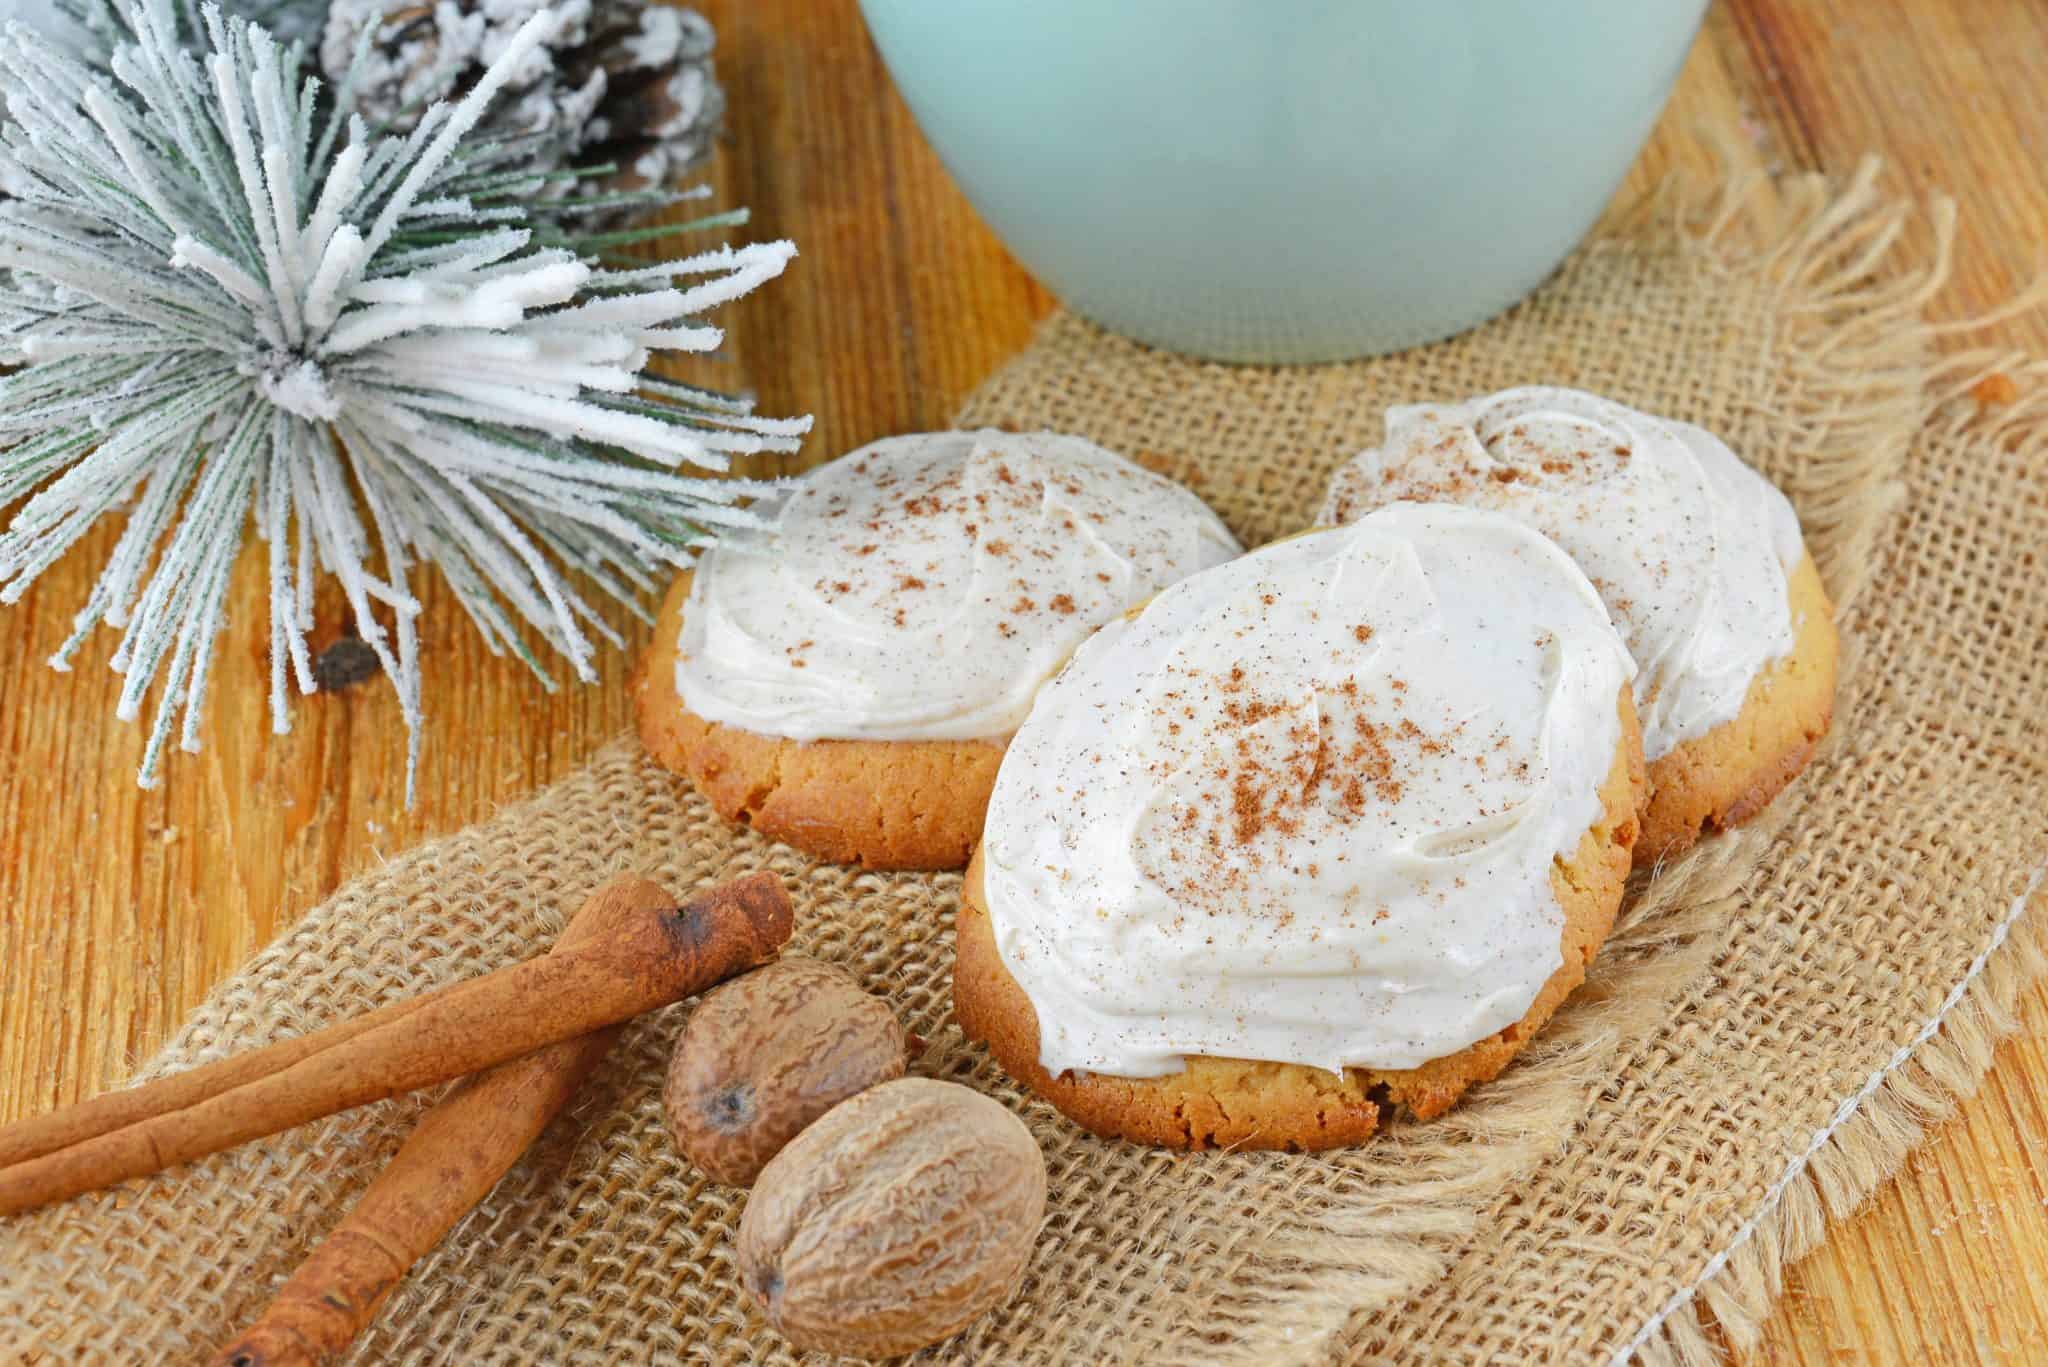 Eggnog Cookies have eggnog mixed into the cookie and the frosting! These cookies come straight from the North Pole and are the best way to use up just a few tablespoons of eggnog.